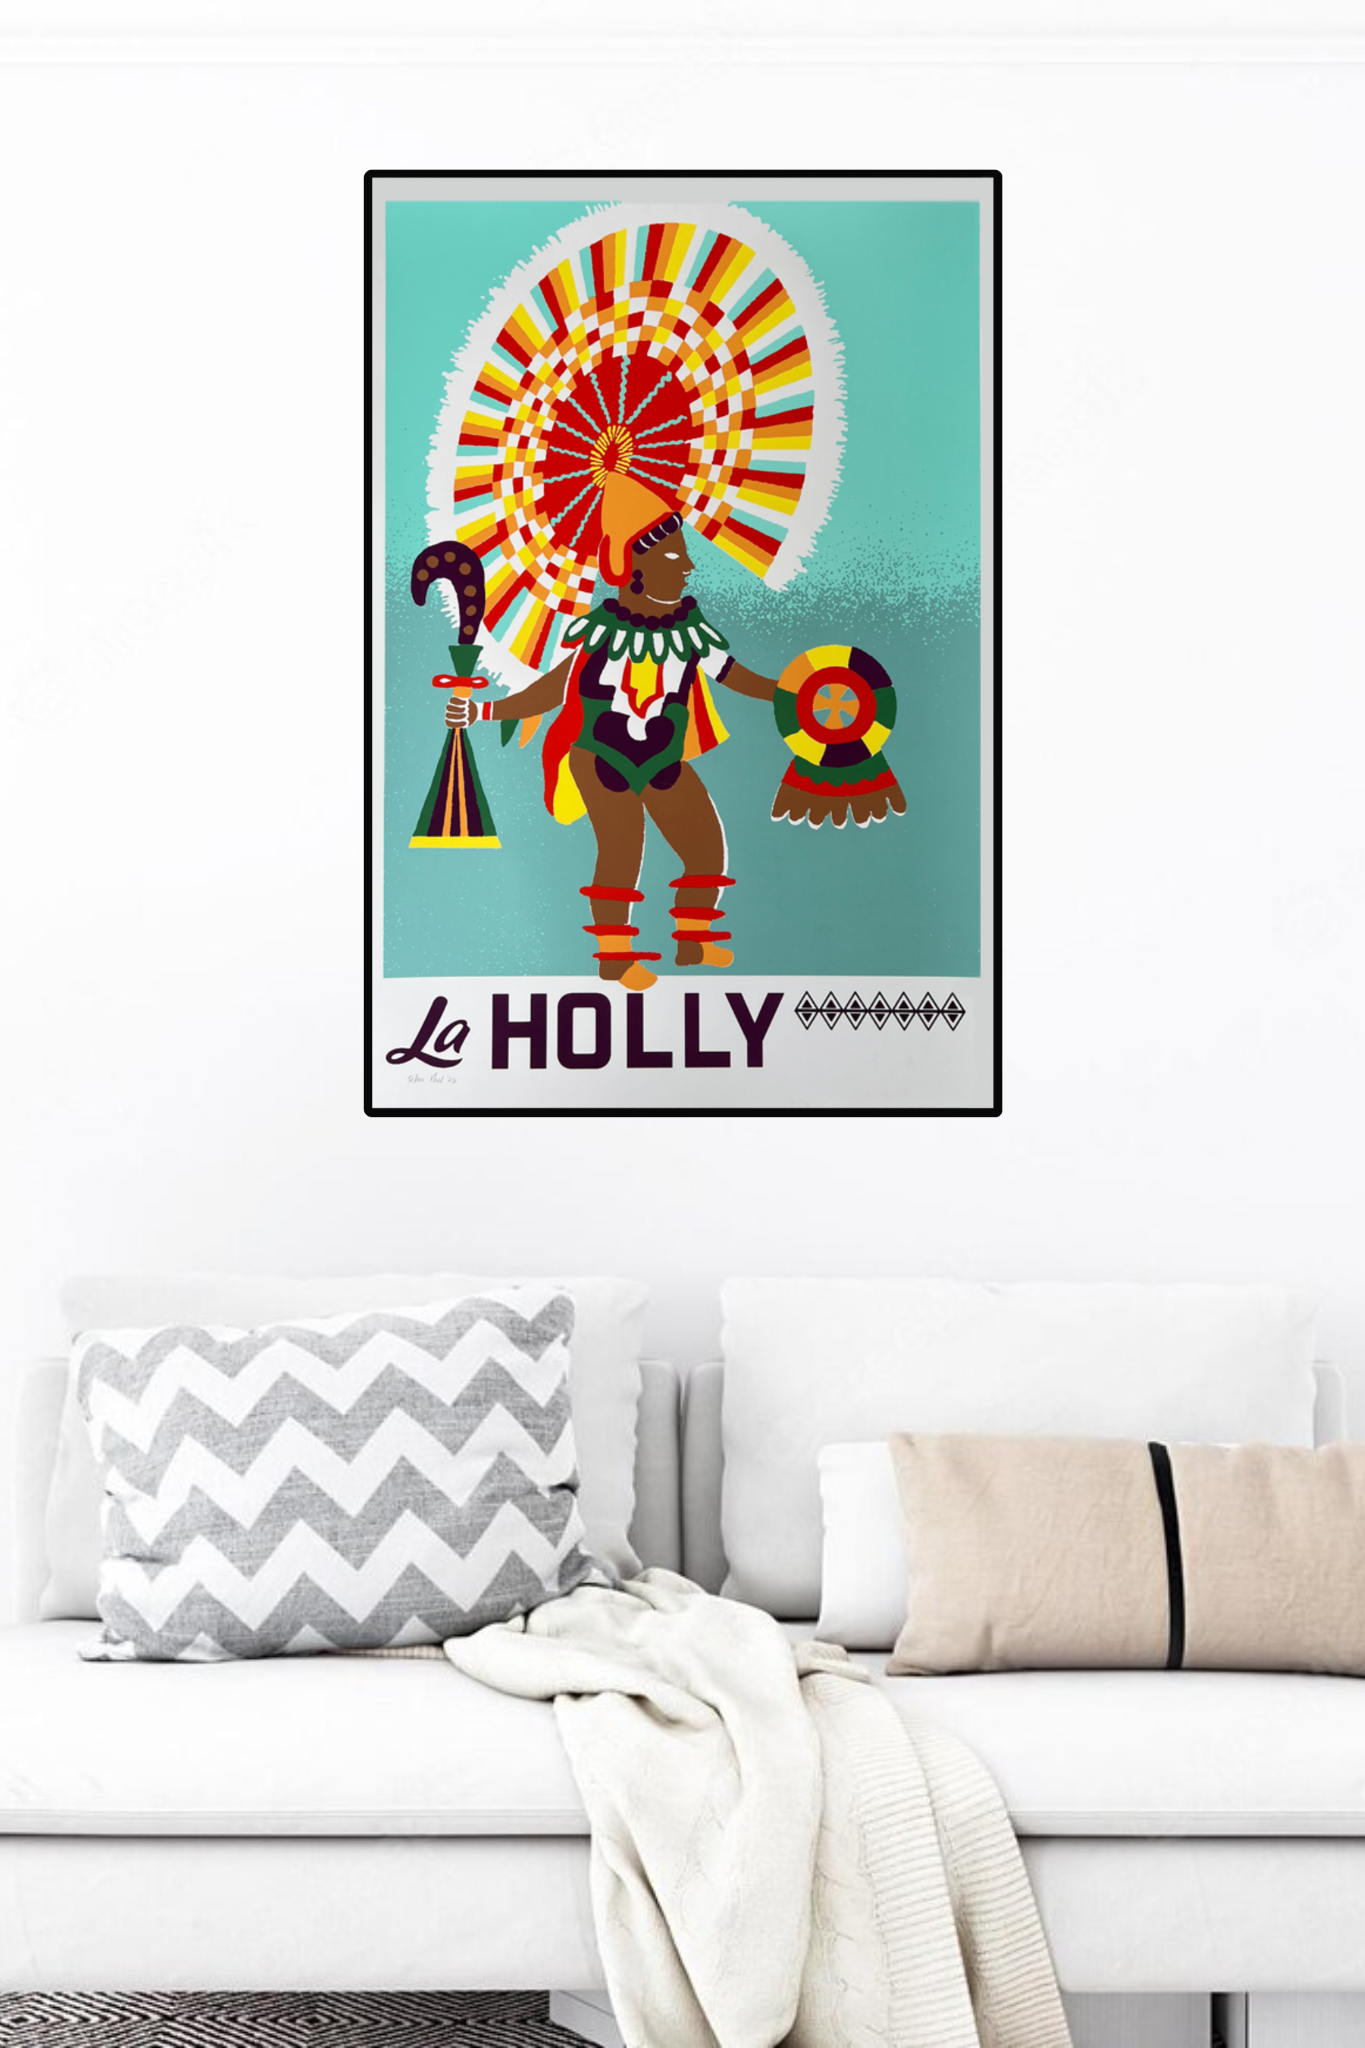 La Holly Limited Poster